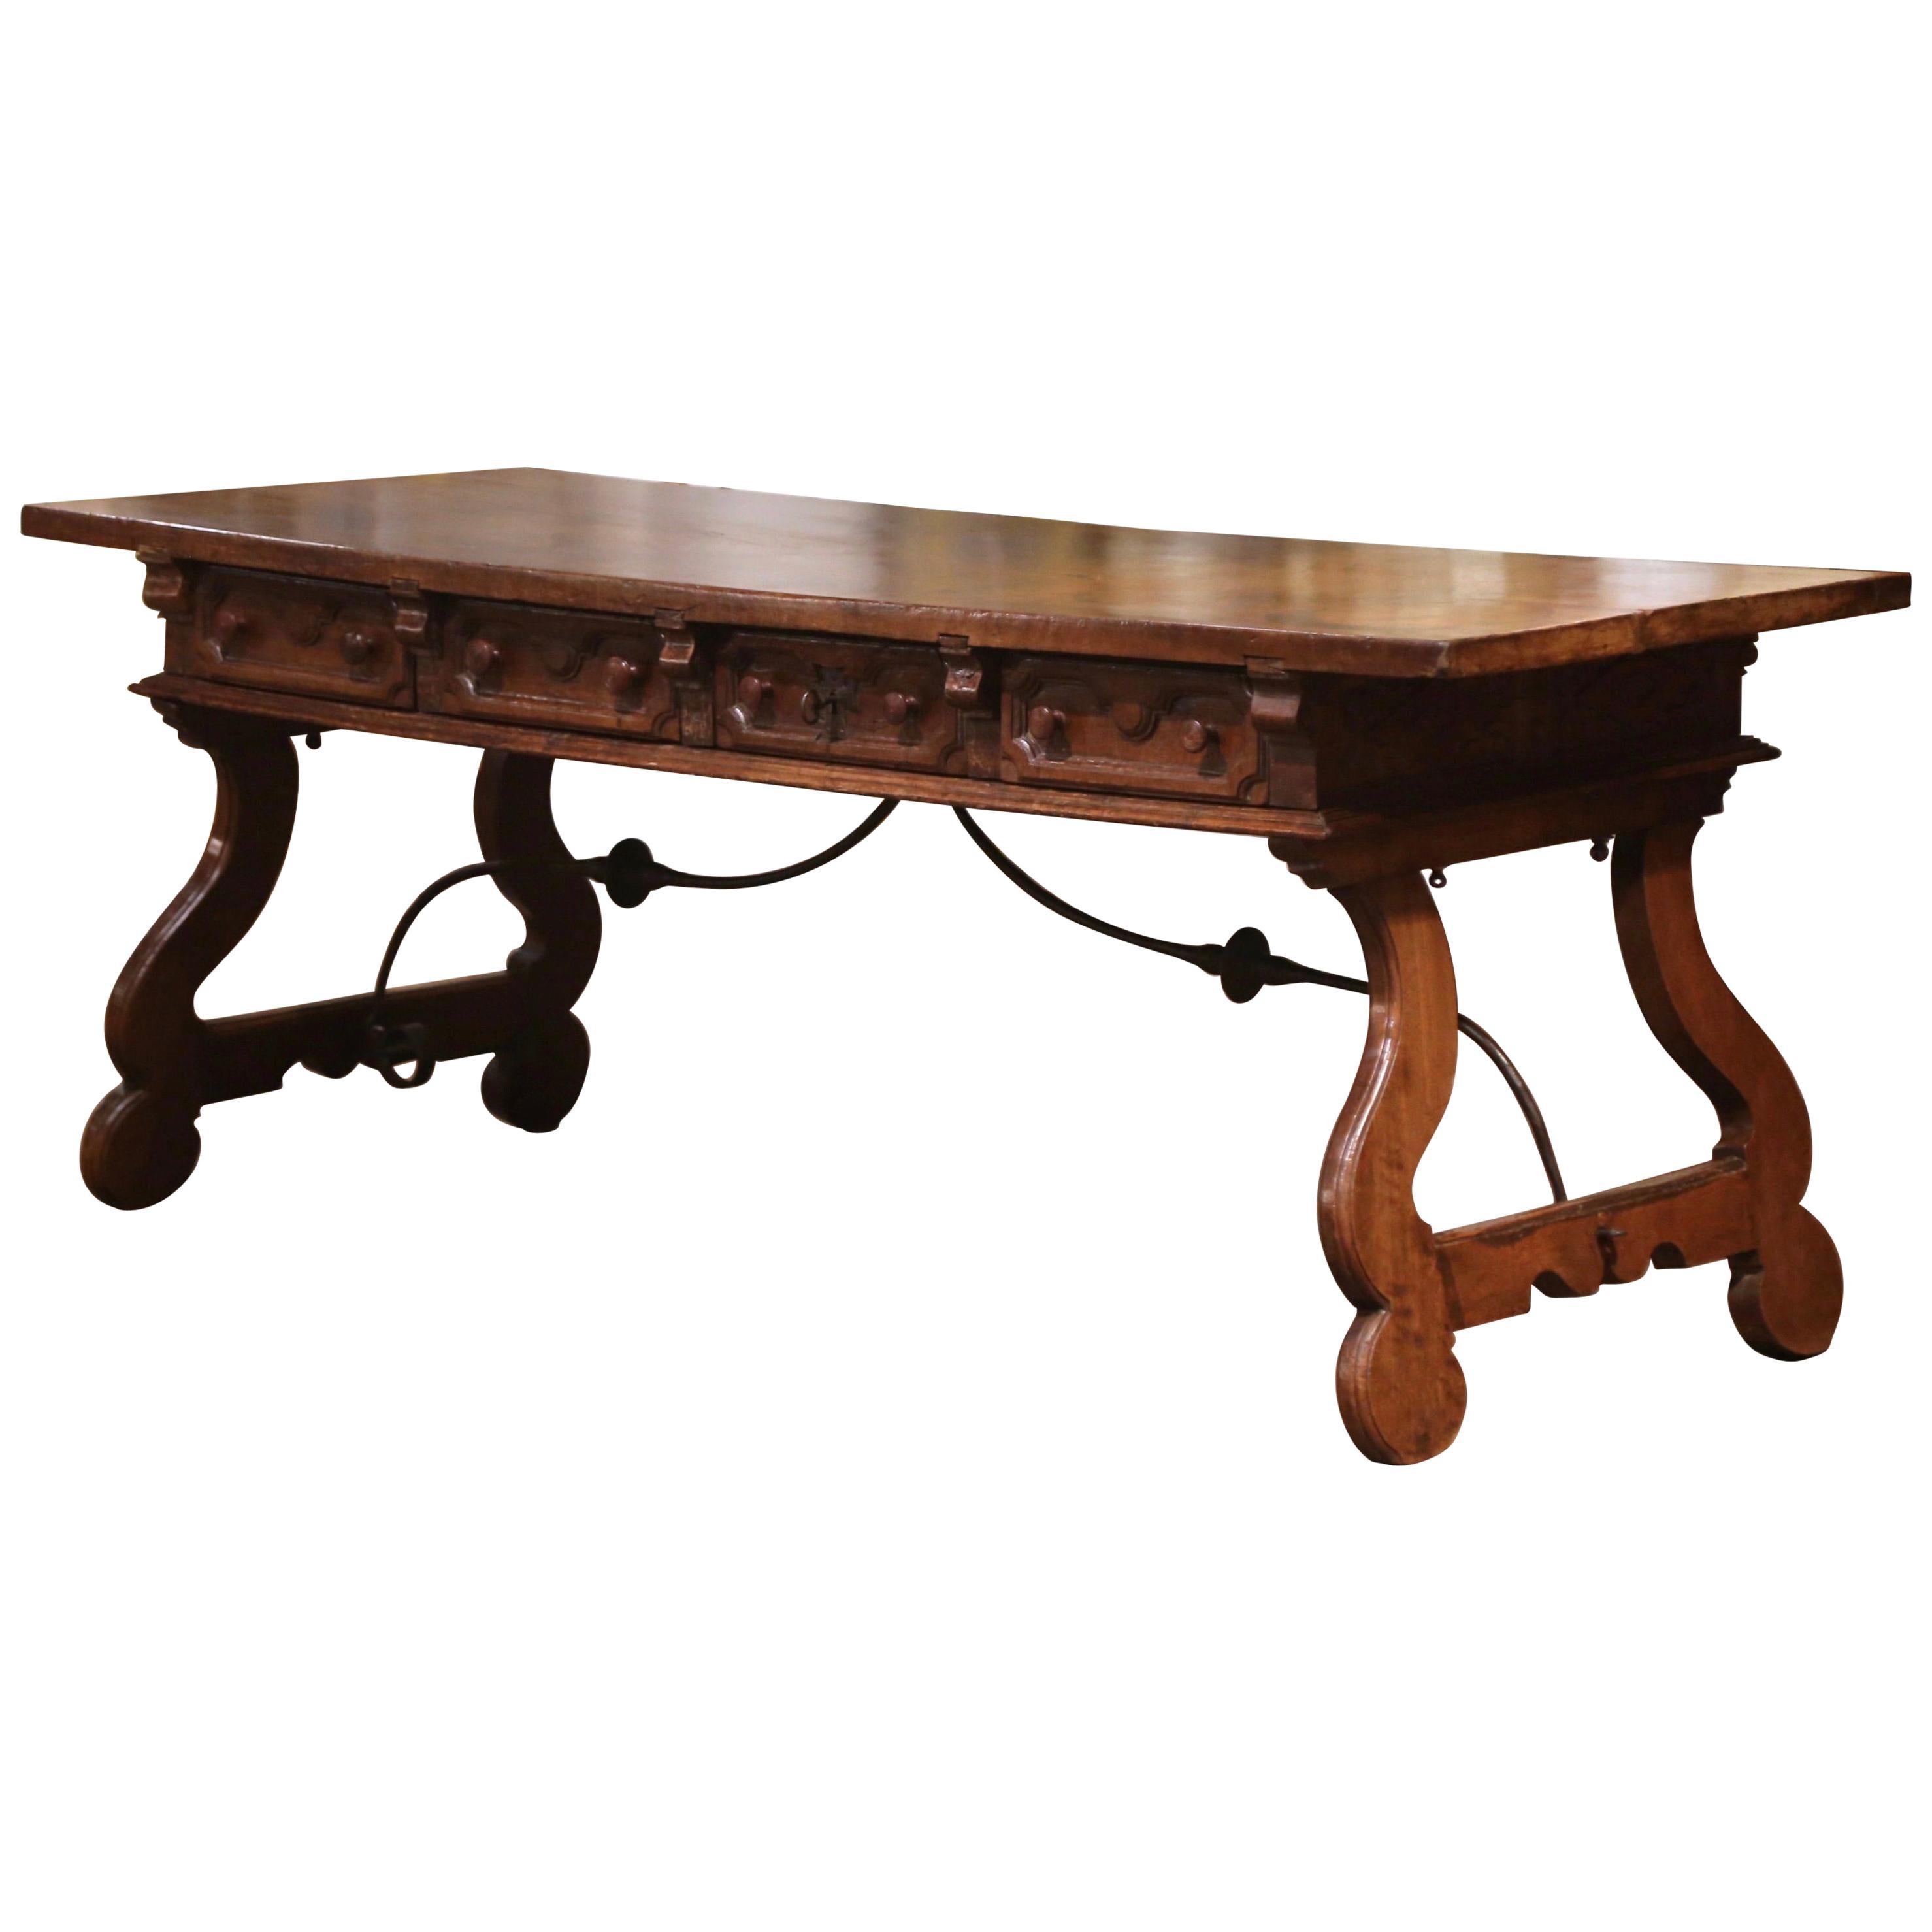 Mid-18th Century Spanish Carved Walnut and Iron Writing Table Desk with Drawers